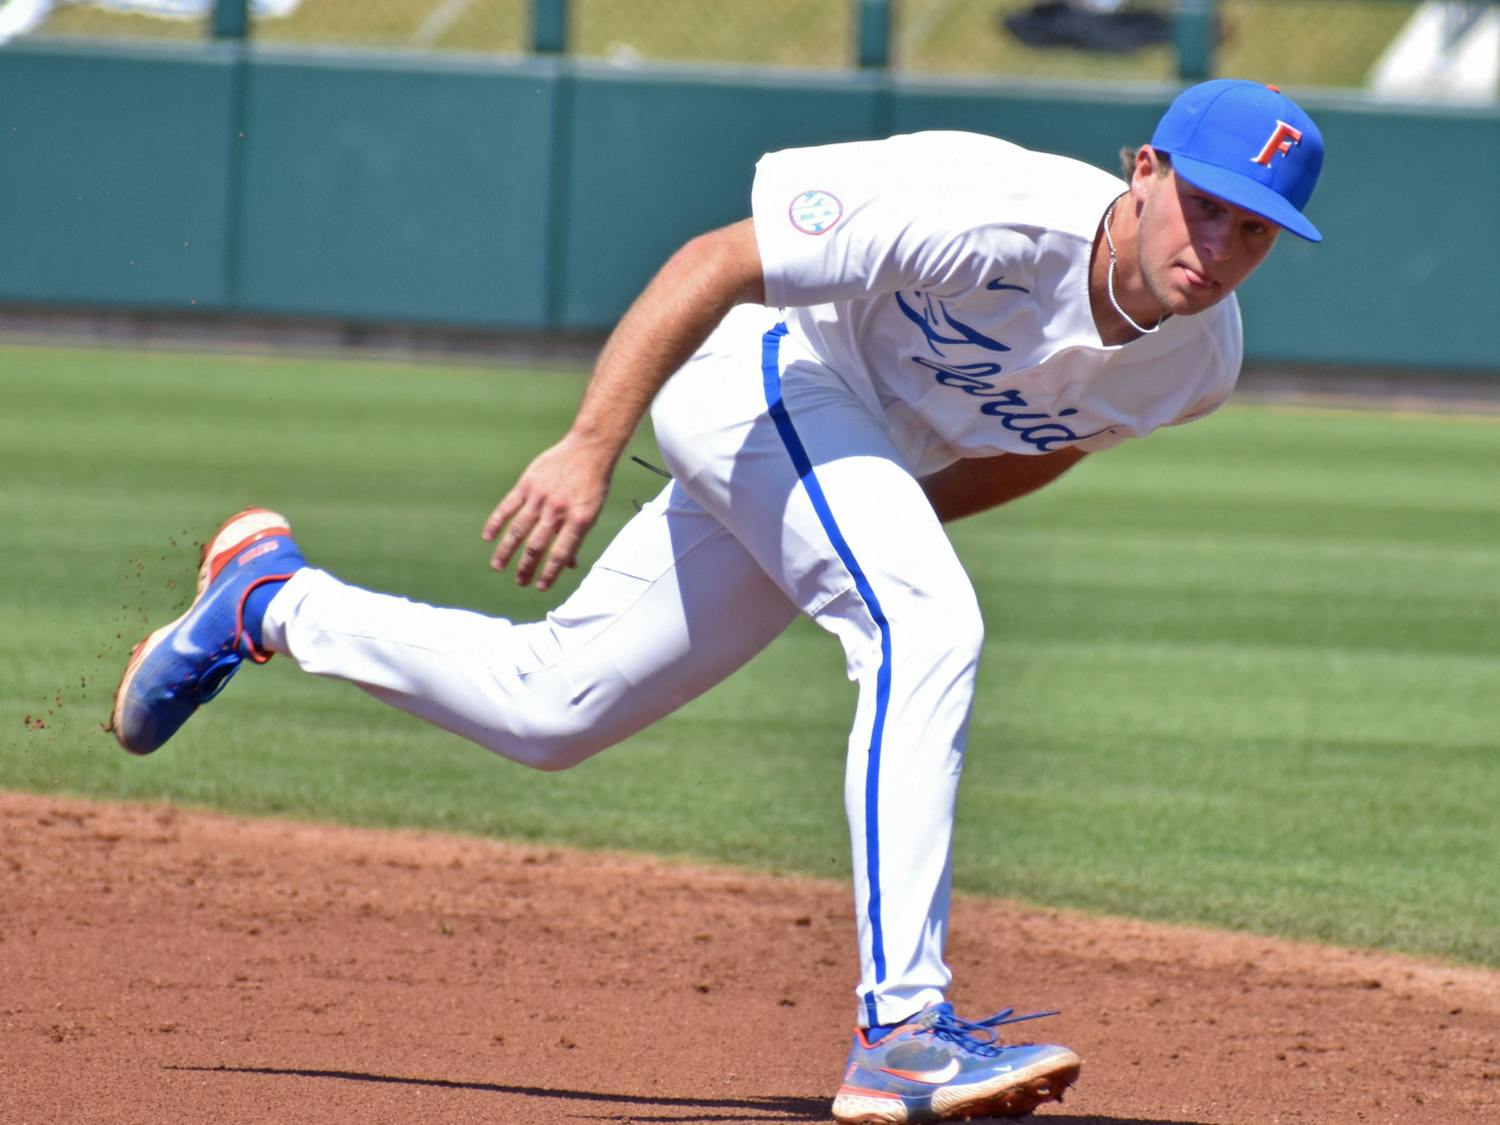 Florida&#x27;s Colby Halter chases after a ball on March 14 during a game against Jacksonville. He recorded 3 RBIs in UF&#x27;s 7-3 win over Central Michigan Friday.